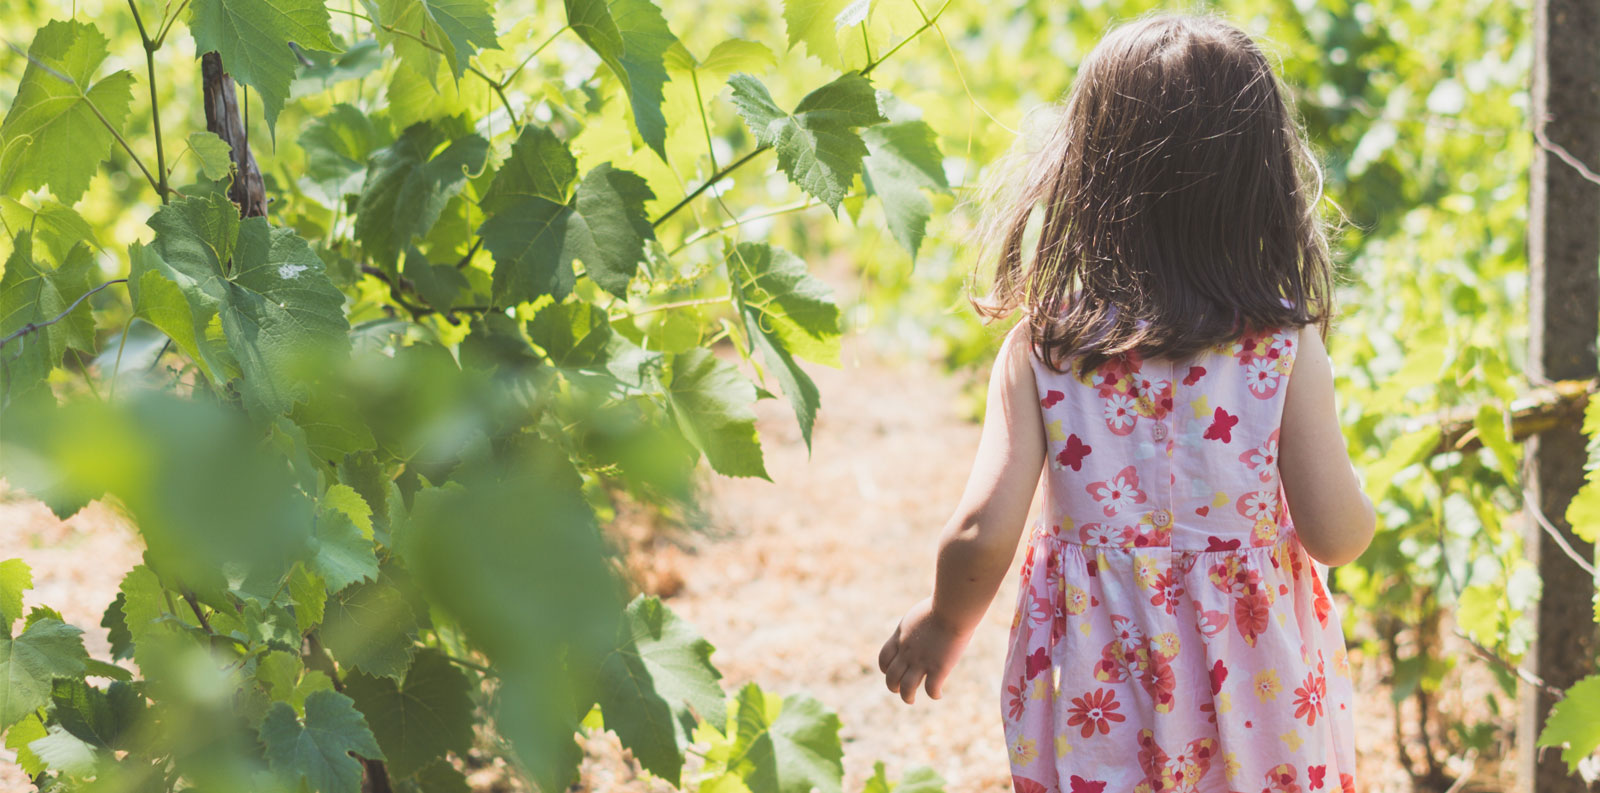 This is a photo of a little girl walking in a vineyard